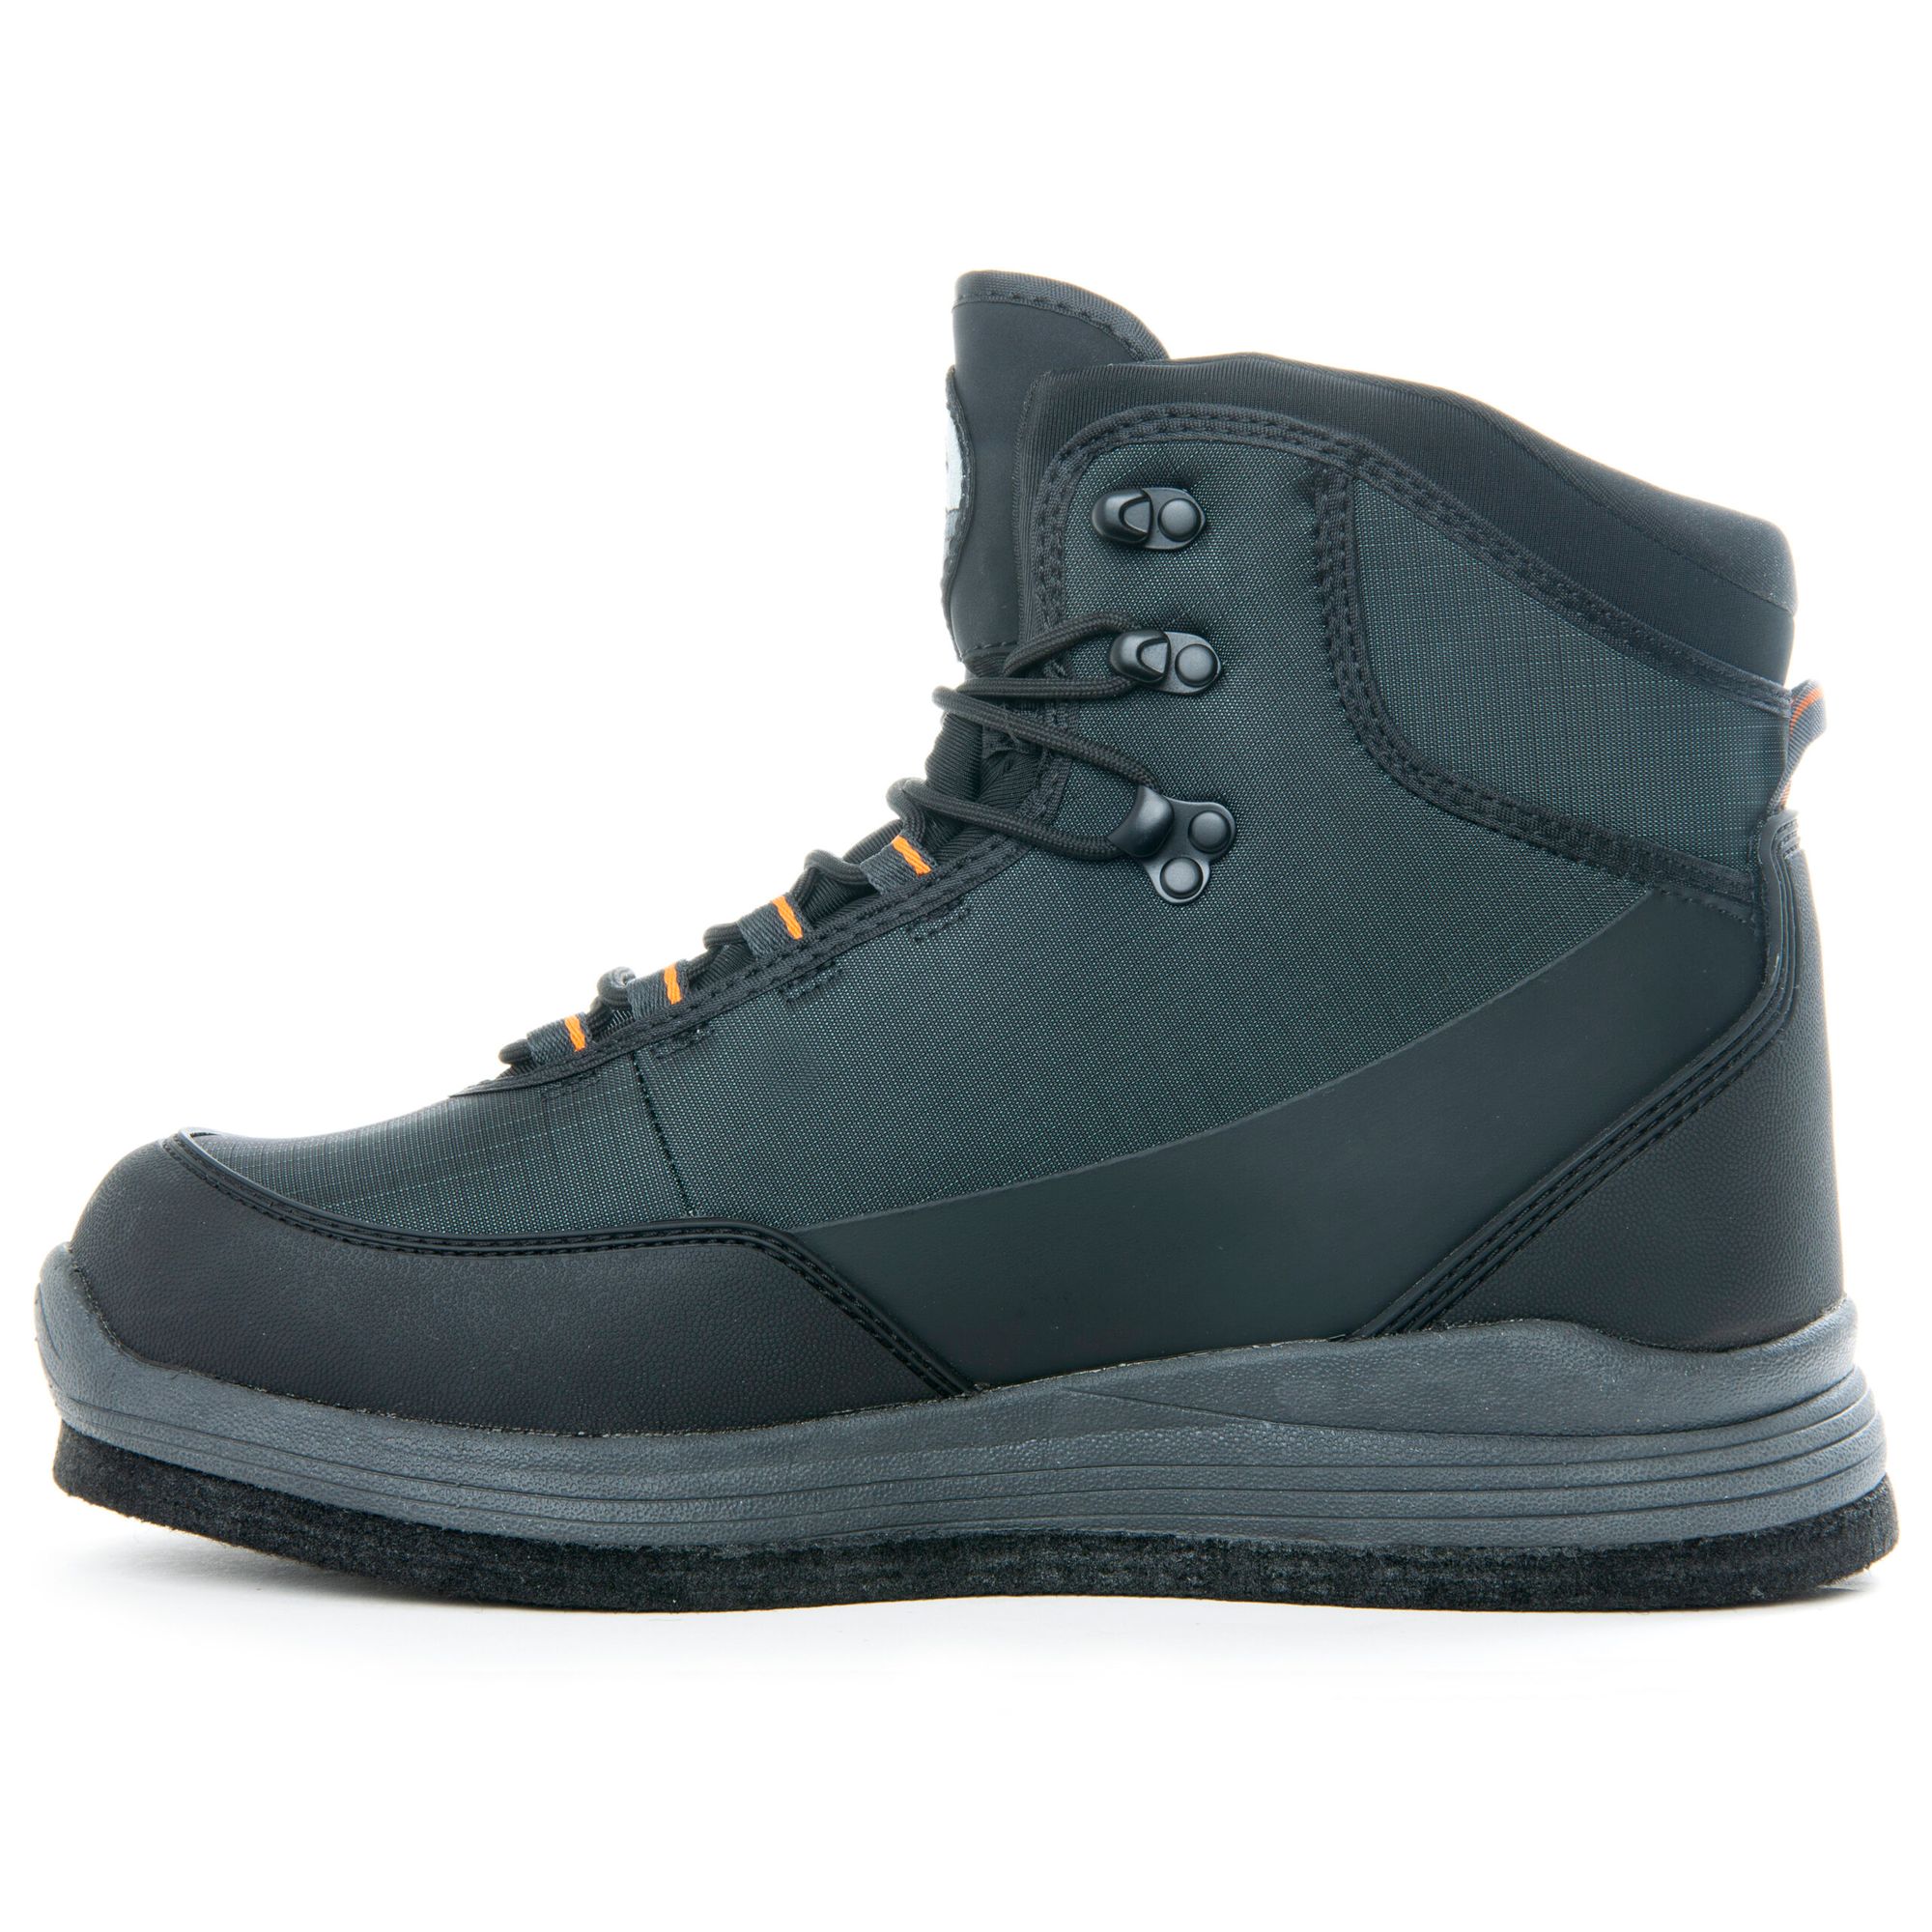 Guideline Alta NGx Felt Wading Boot - Fin & Game